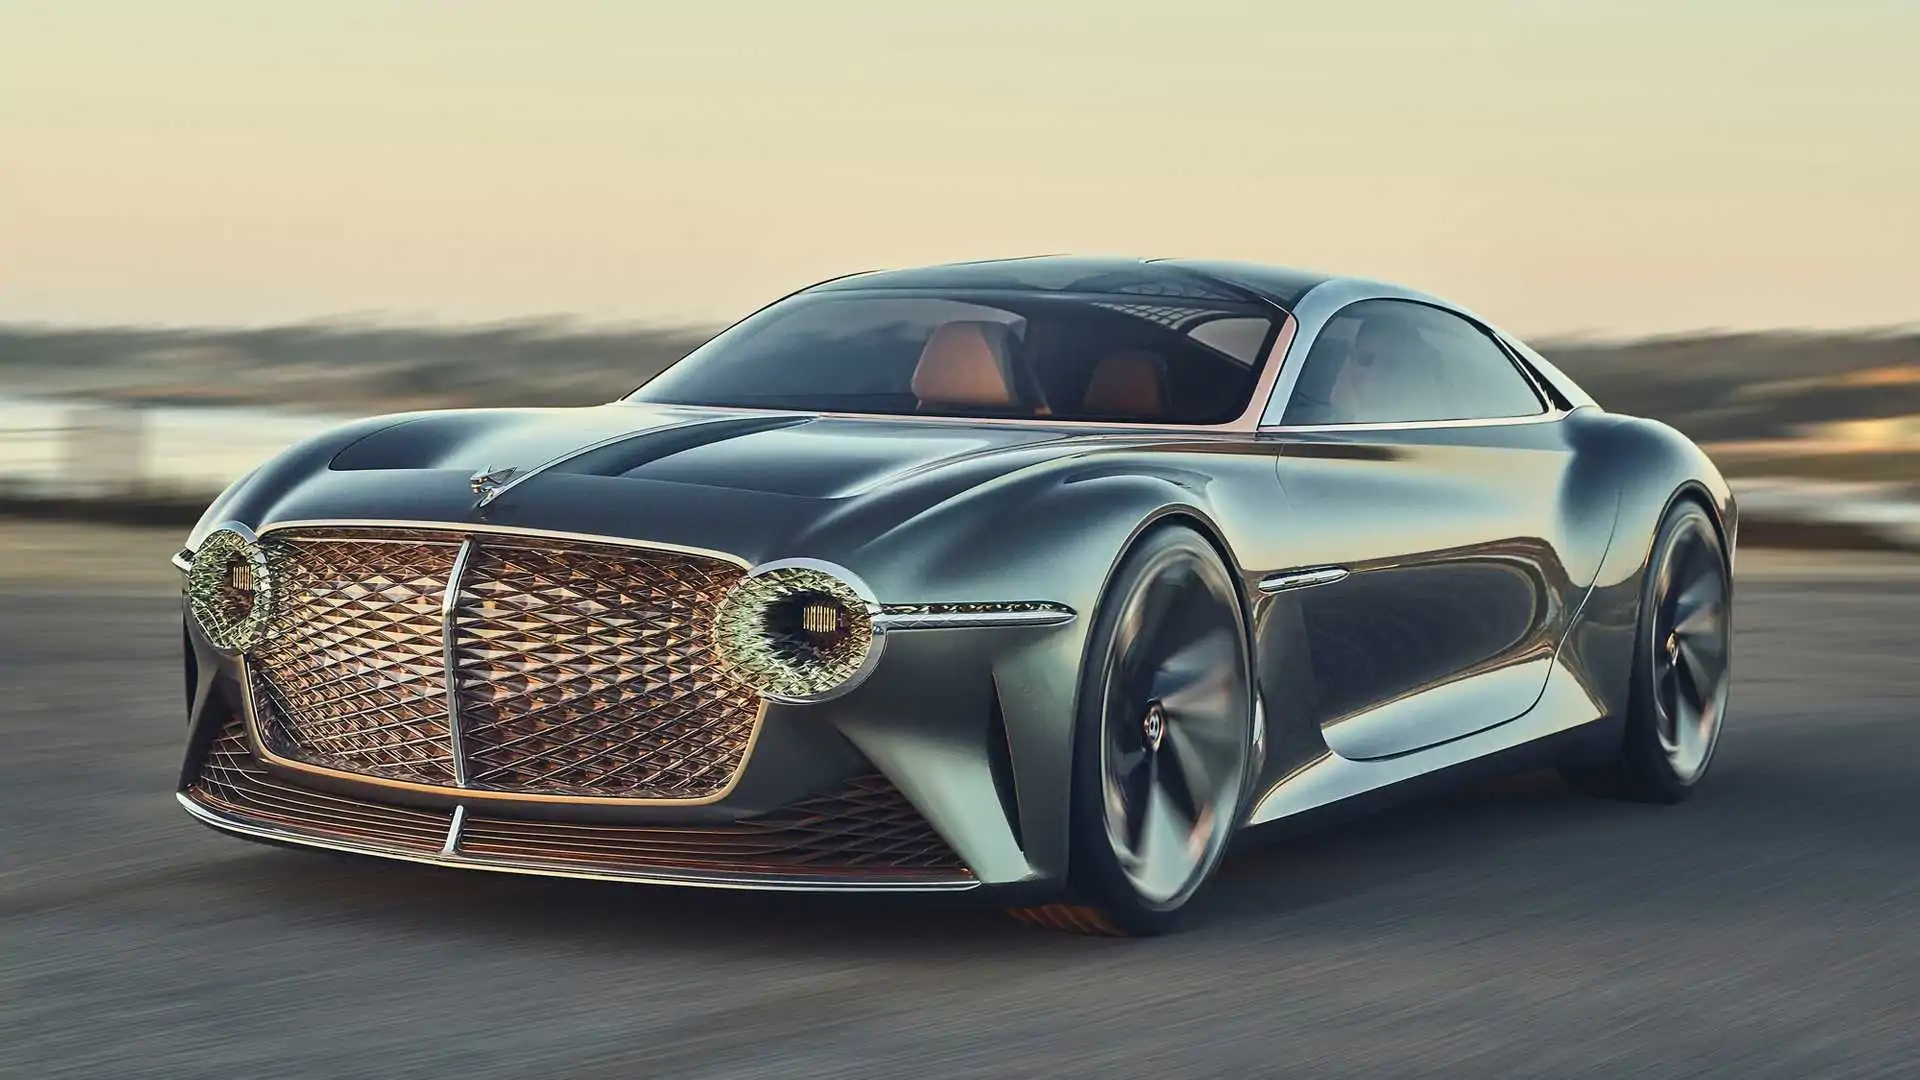 Bentley Delays Its First Electric Vehicle and Pushes Back Electrification Date.